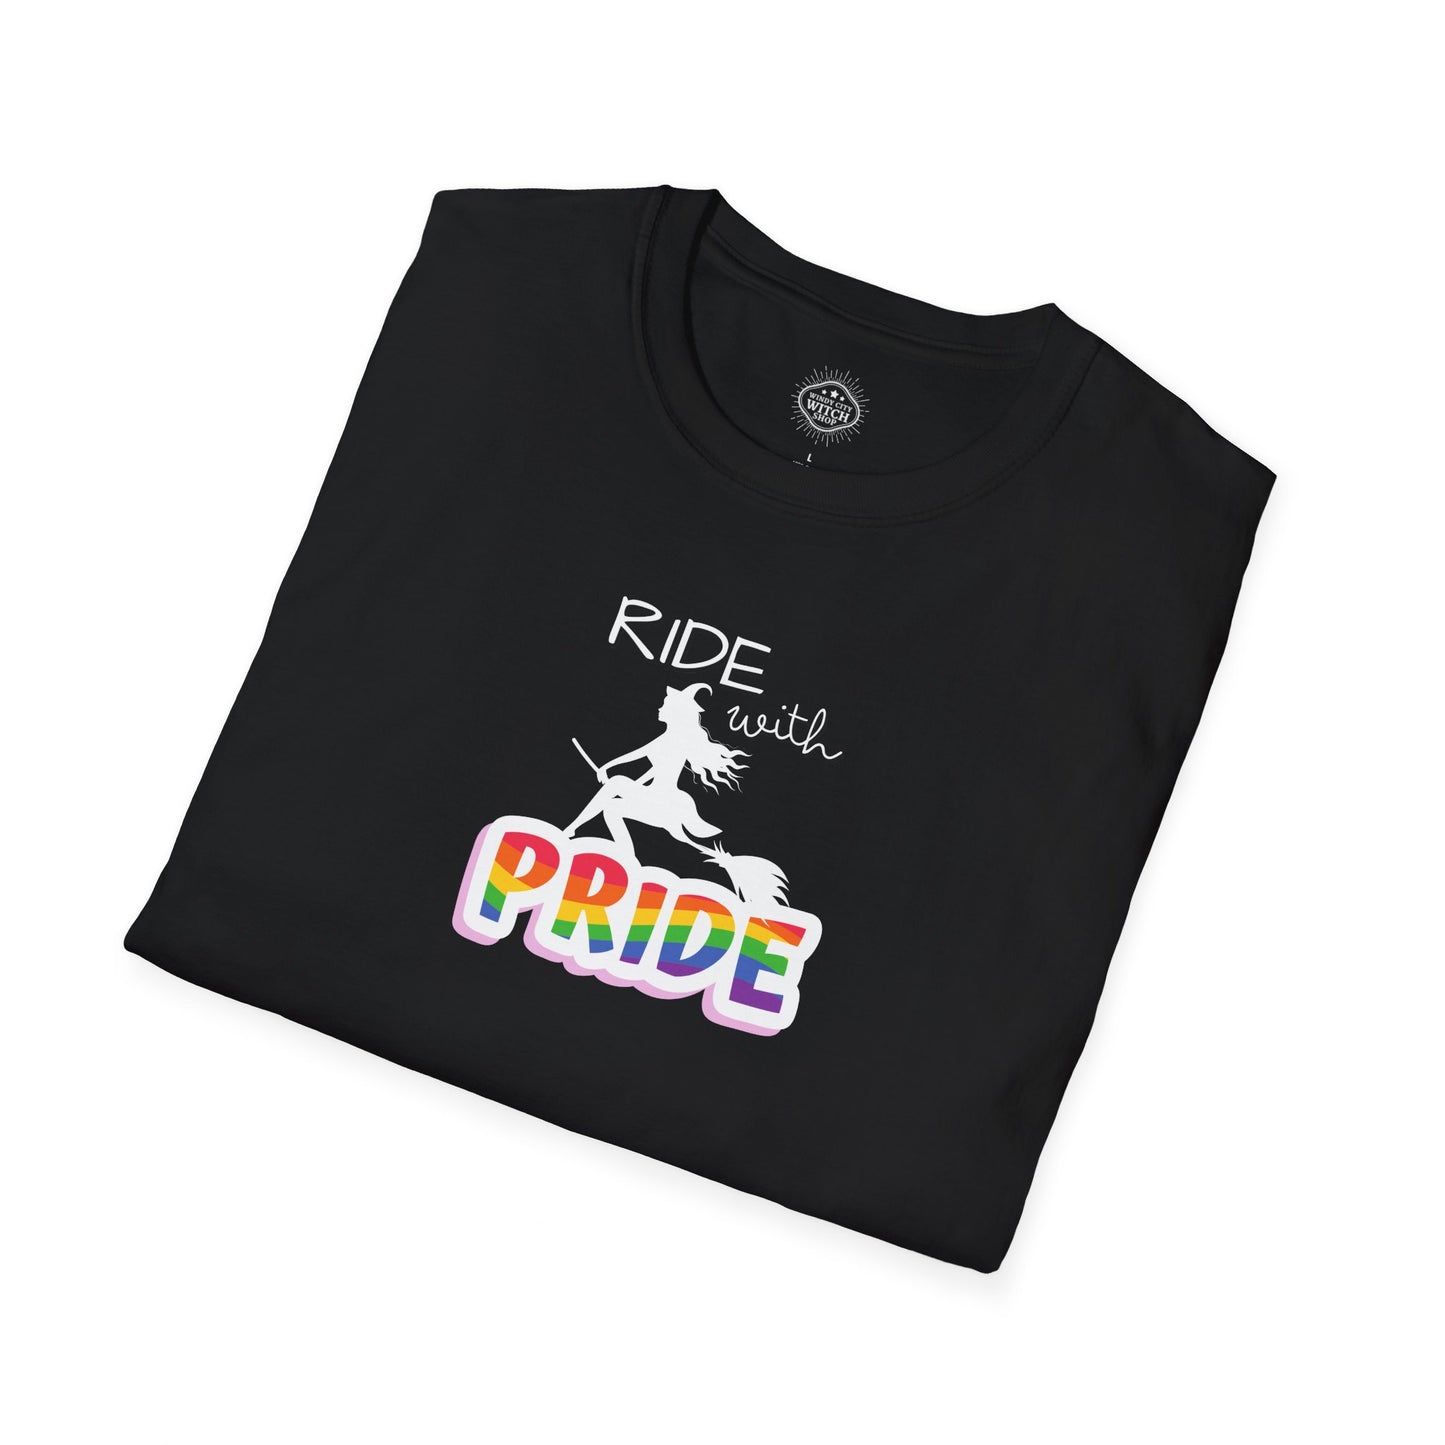 Ride with Pride T-Shirt